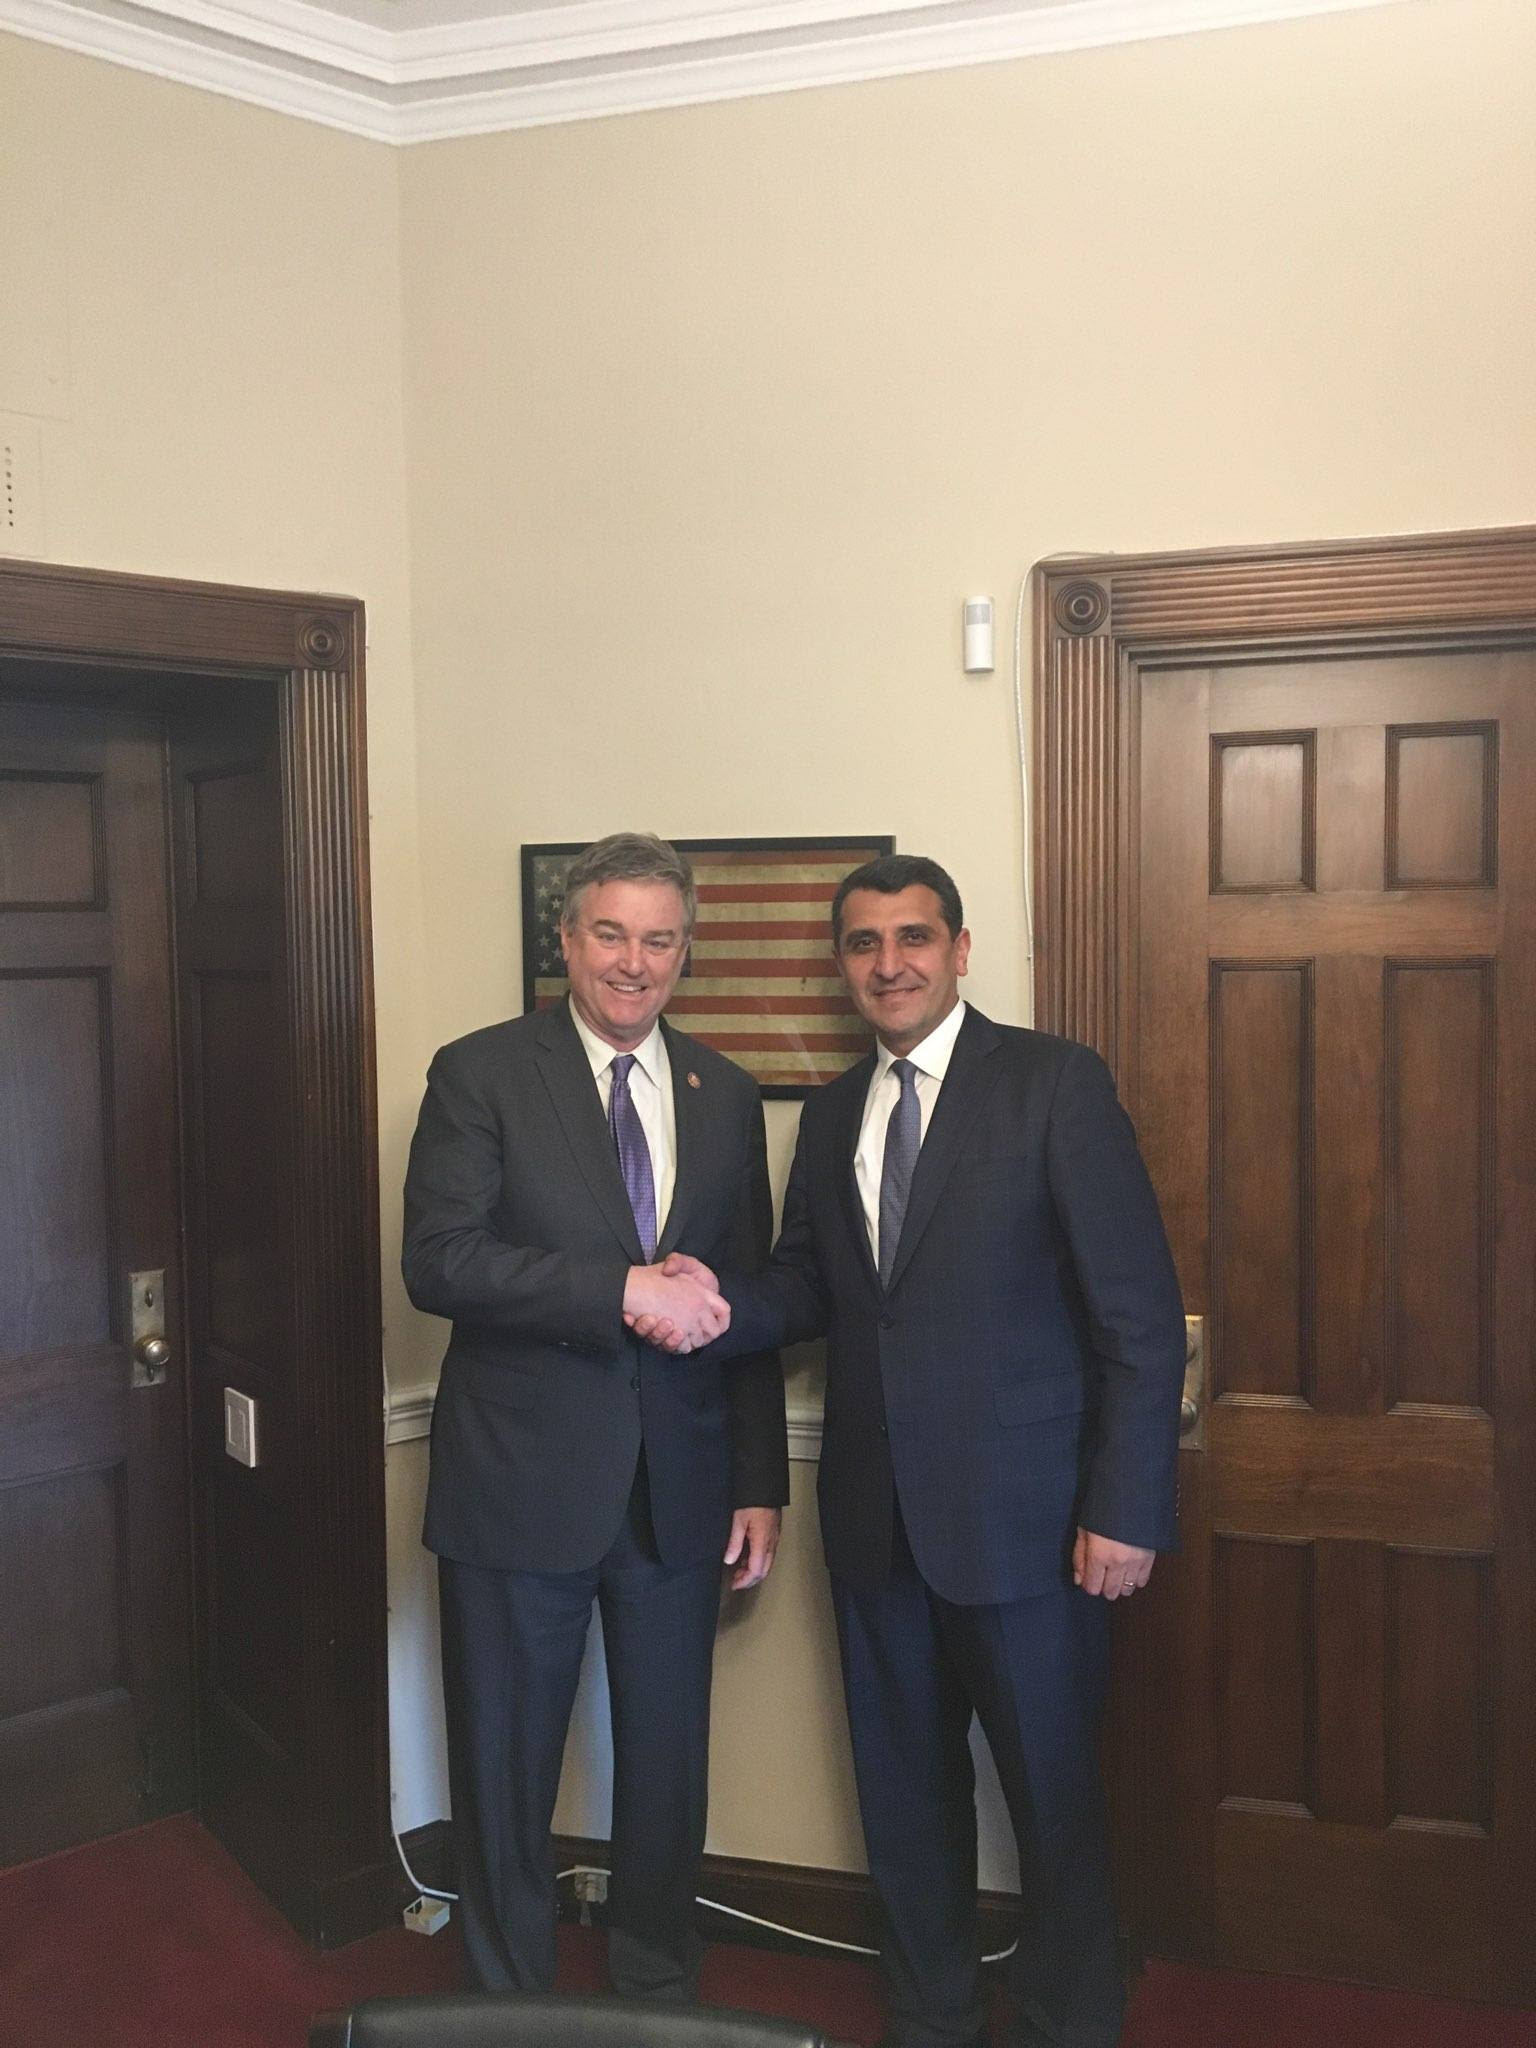 Ambassador Nersesyan thanked Congressman Trone for supporting the 2019 Armenian Genocide resolution